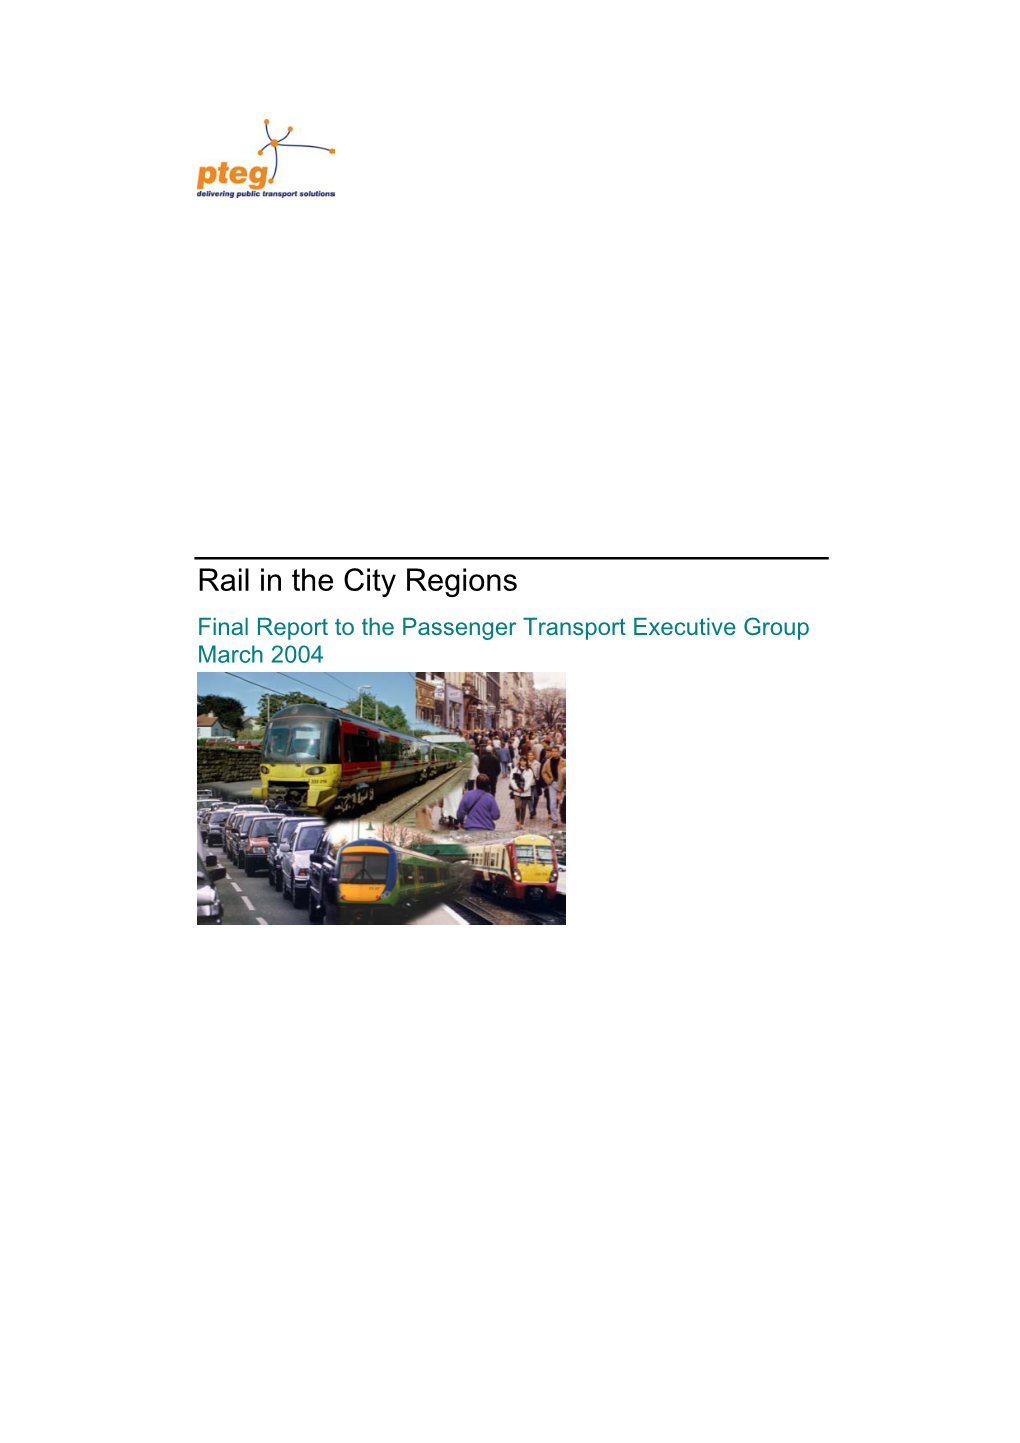 Rail in the City Regions Final Report to the Passenger Transport Executive Group March 2004